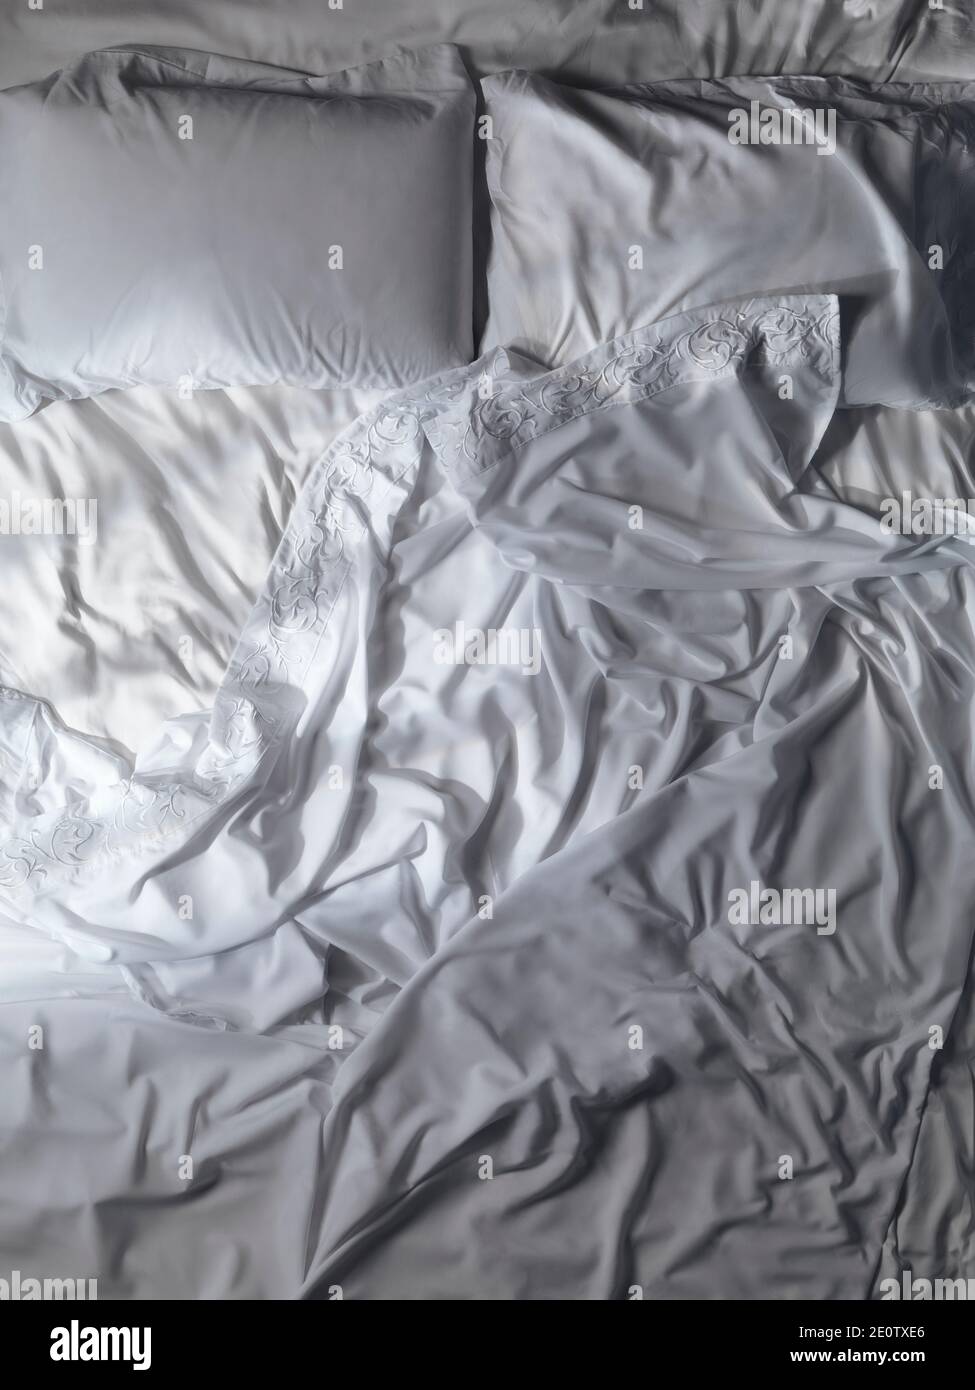 Unmade empty bed, white lace messy wrinkled bed sheets and pillows. Artistic background, view from above. Stock Photo